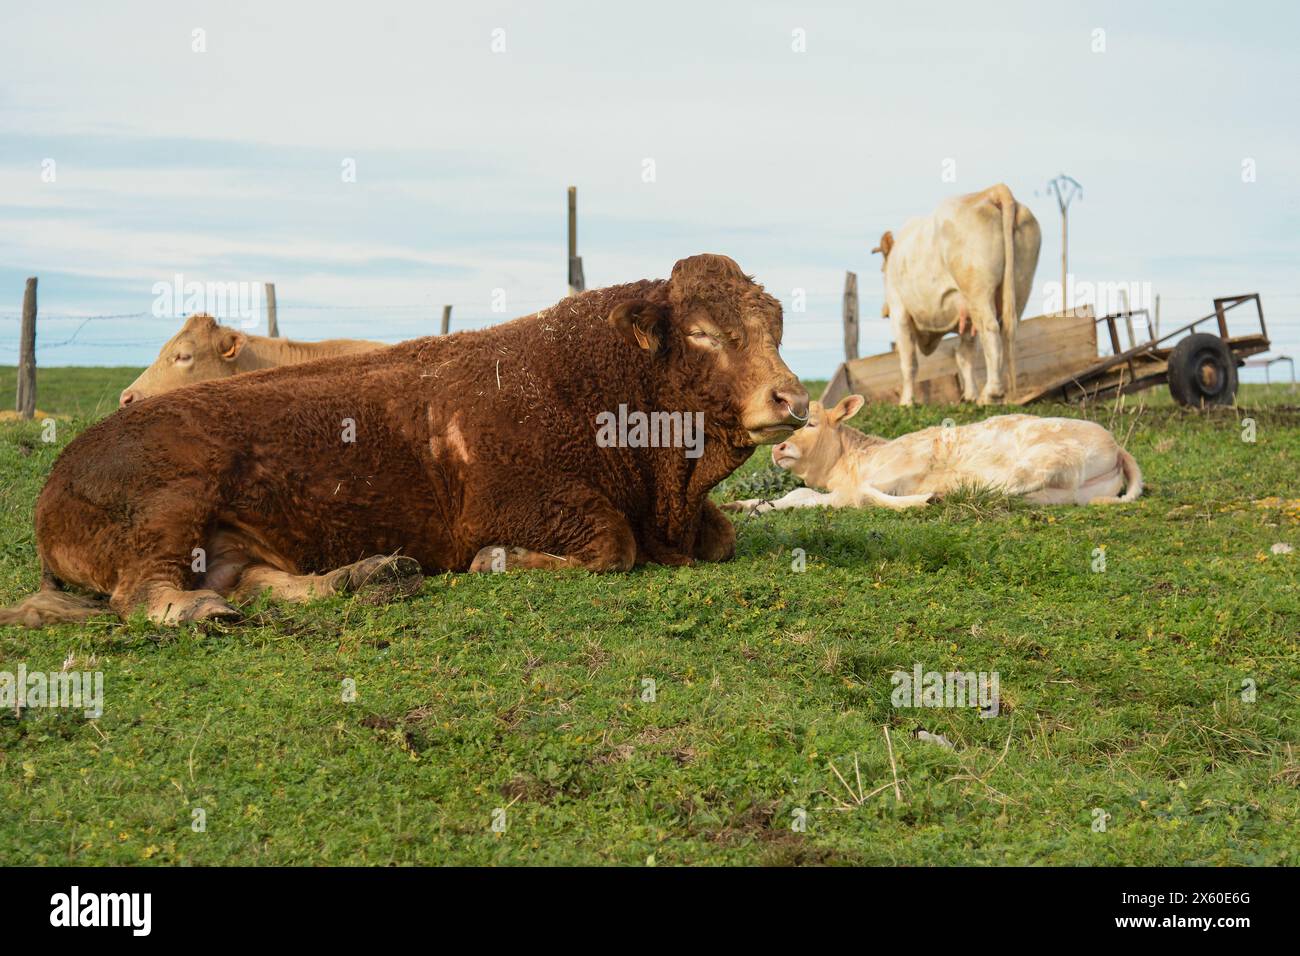 Closeup of a bull lying in a field Stock Photo